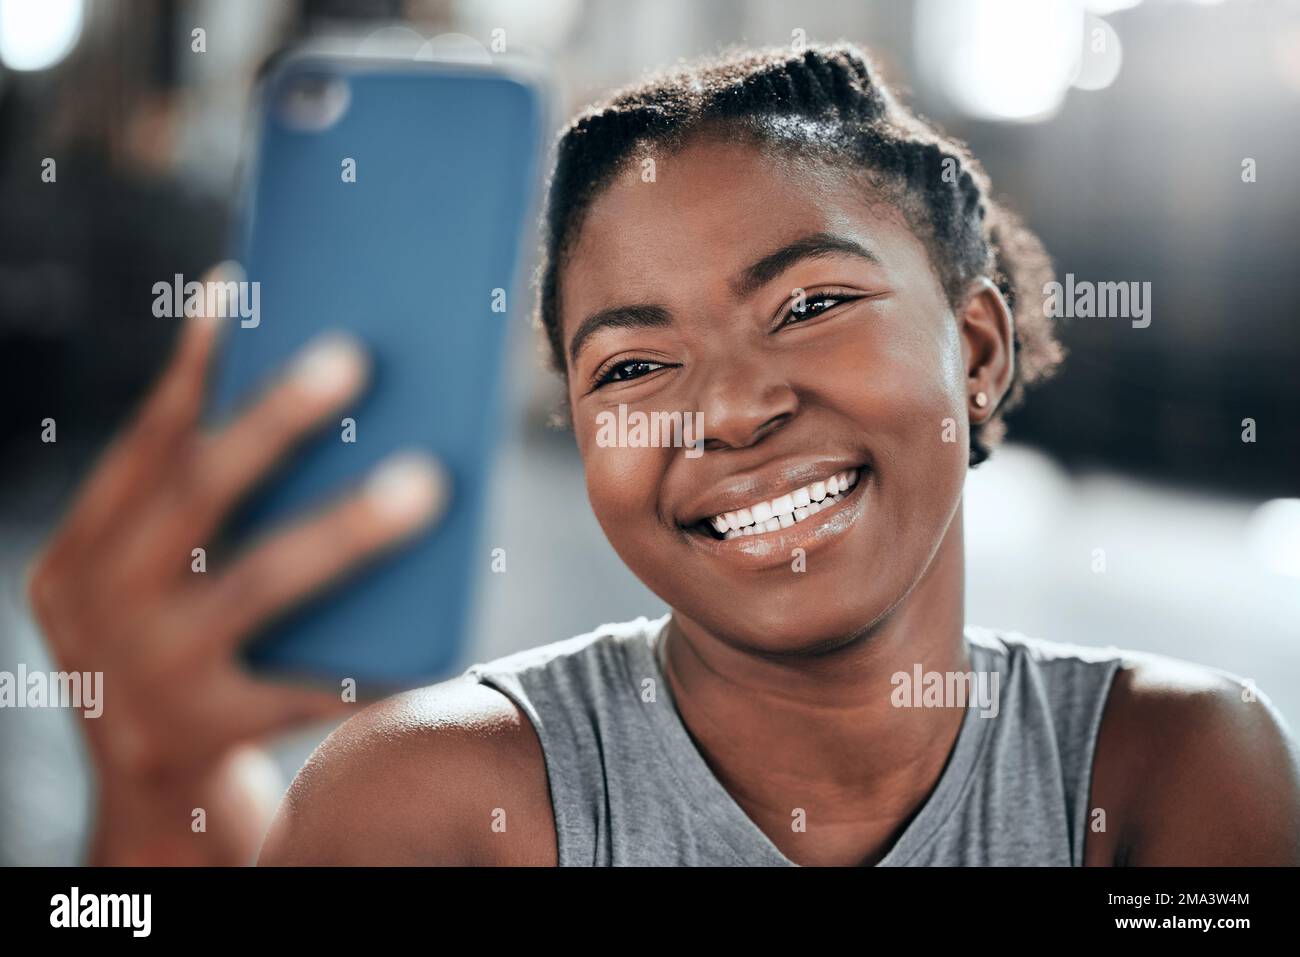 No man could blow out this fuze. a young beautiful woman using her cellphone to take a selfie after her workout at the gym. Stock Photo